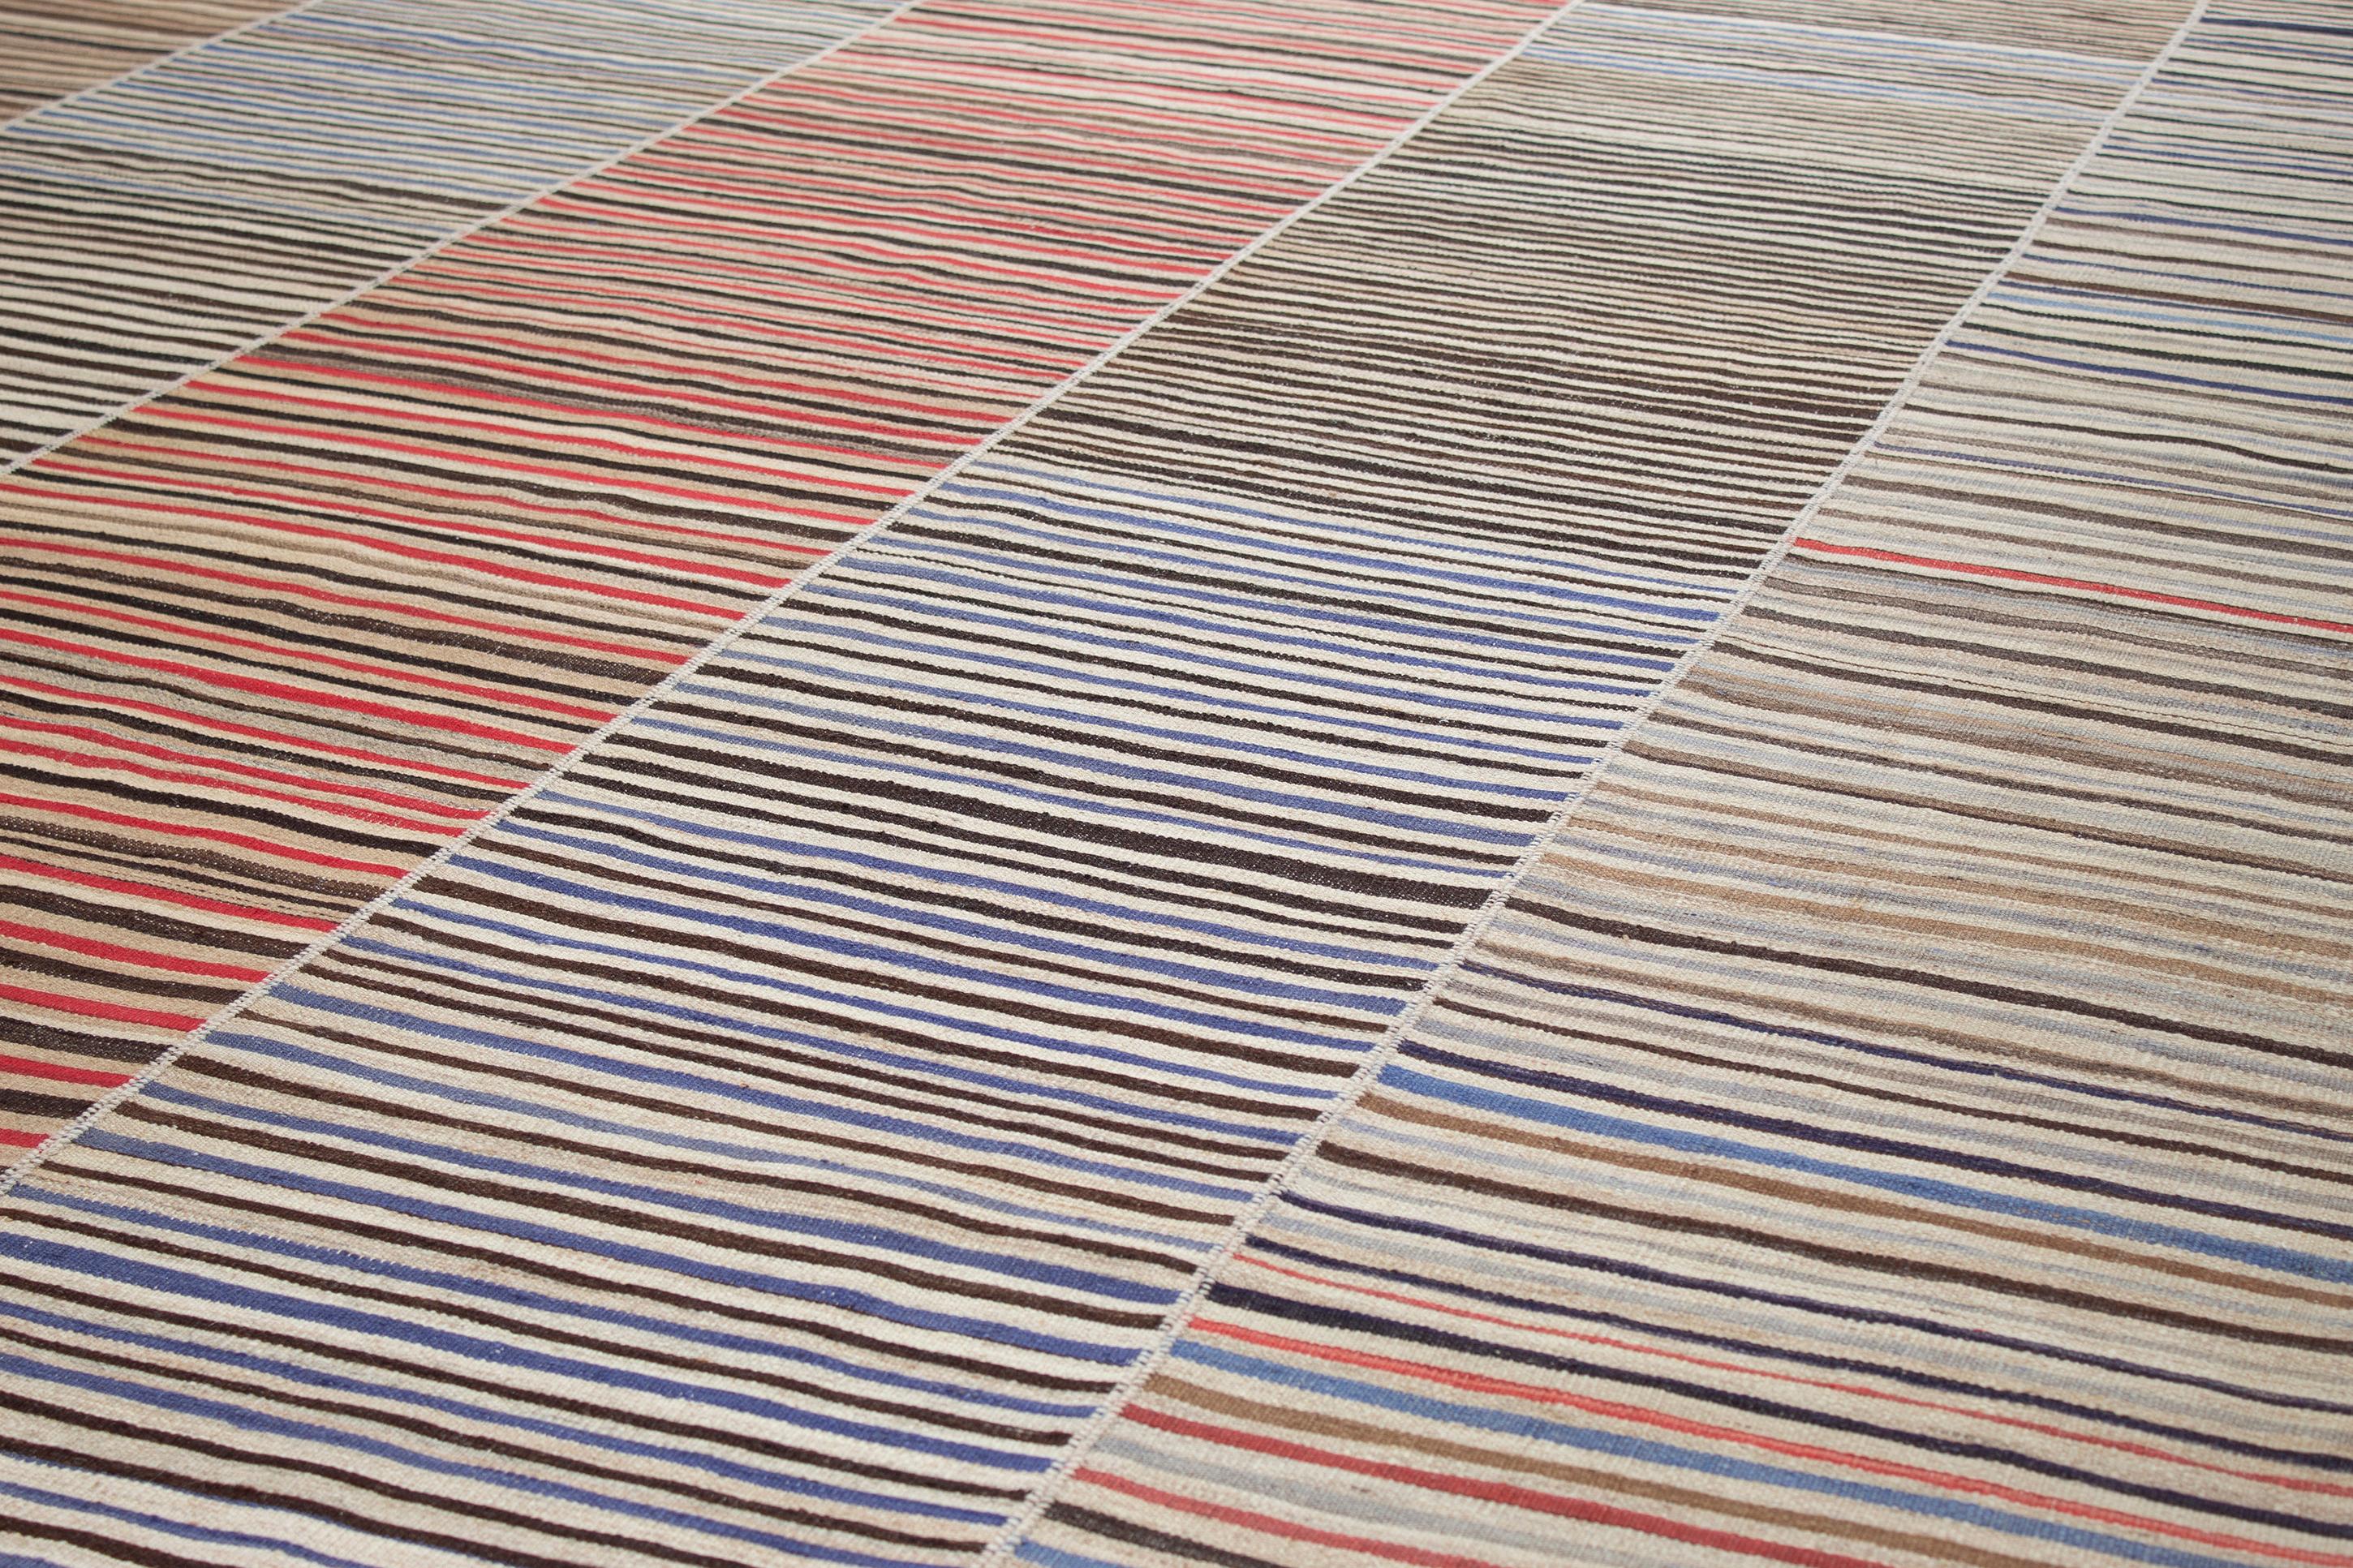 Made of the finest Persian wool, our Mazandaran collection highlights the Minimalist sophistication that existed long before the modern era. The collection was inspired by the kilims that were woven by Persian women in the Mazandaran Province in